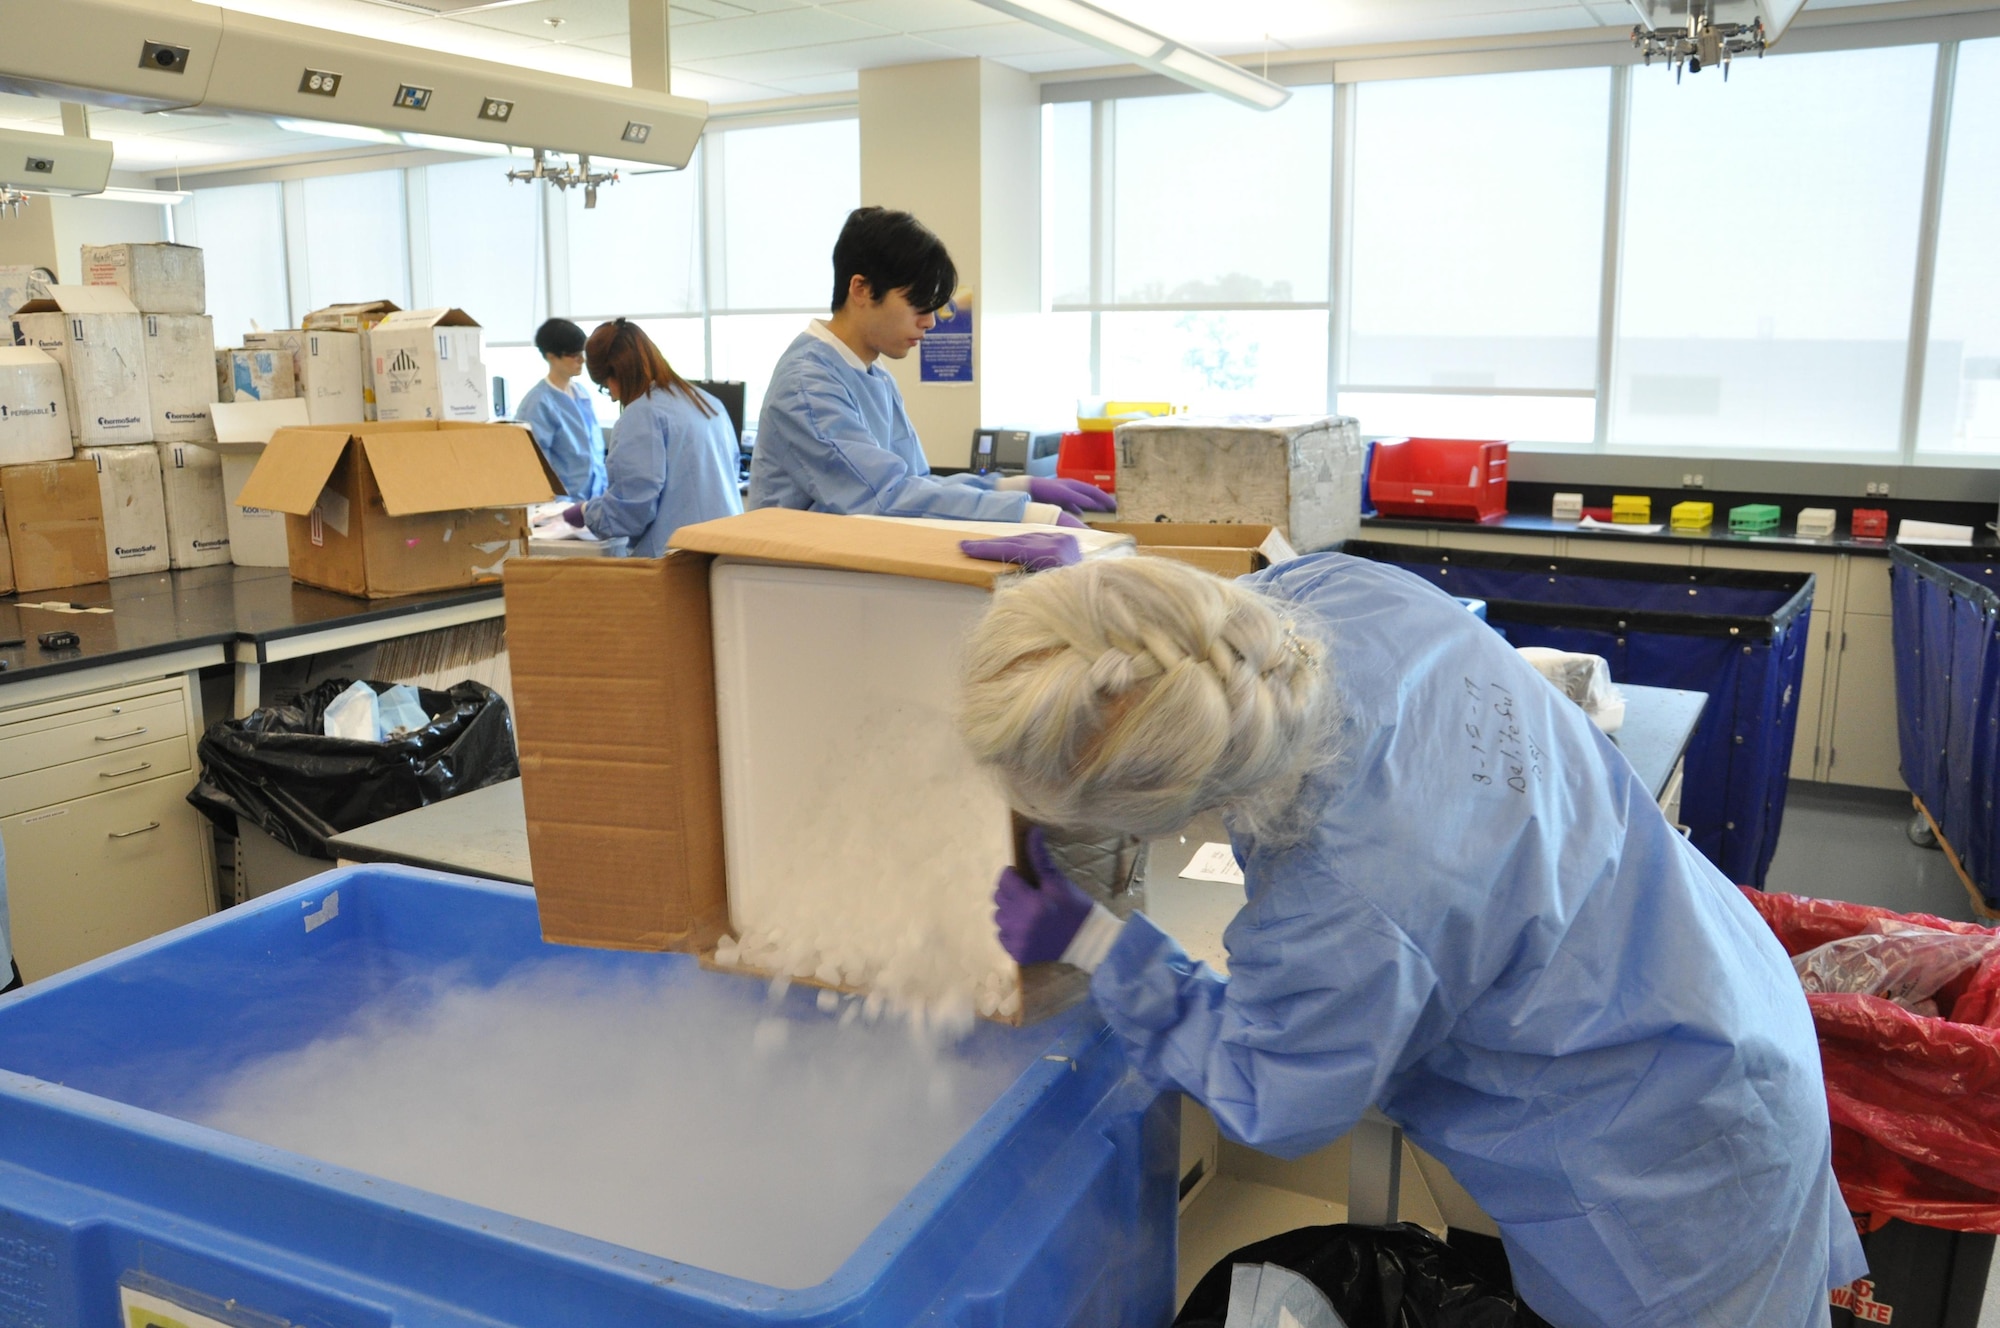 711th Human Performance Wing “Epi Lab” supports medical readiness of Airmen, families